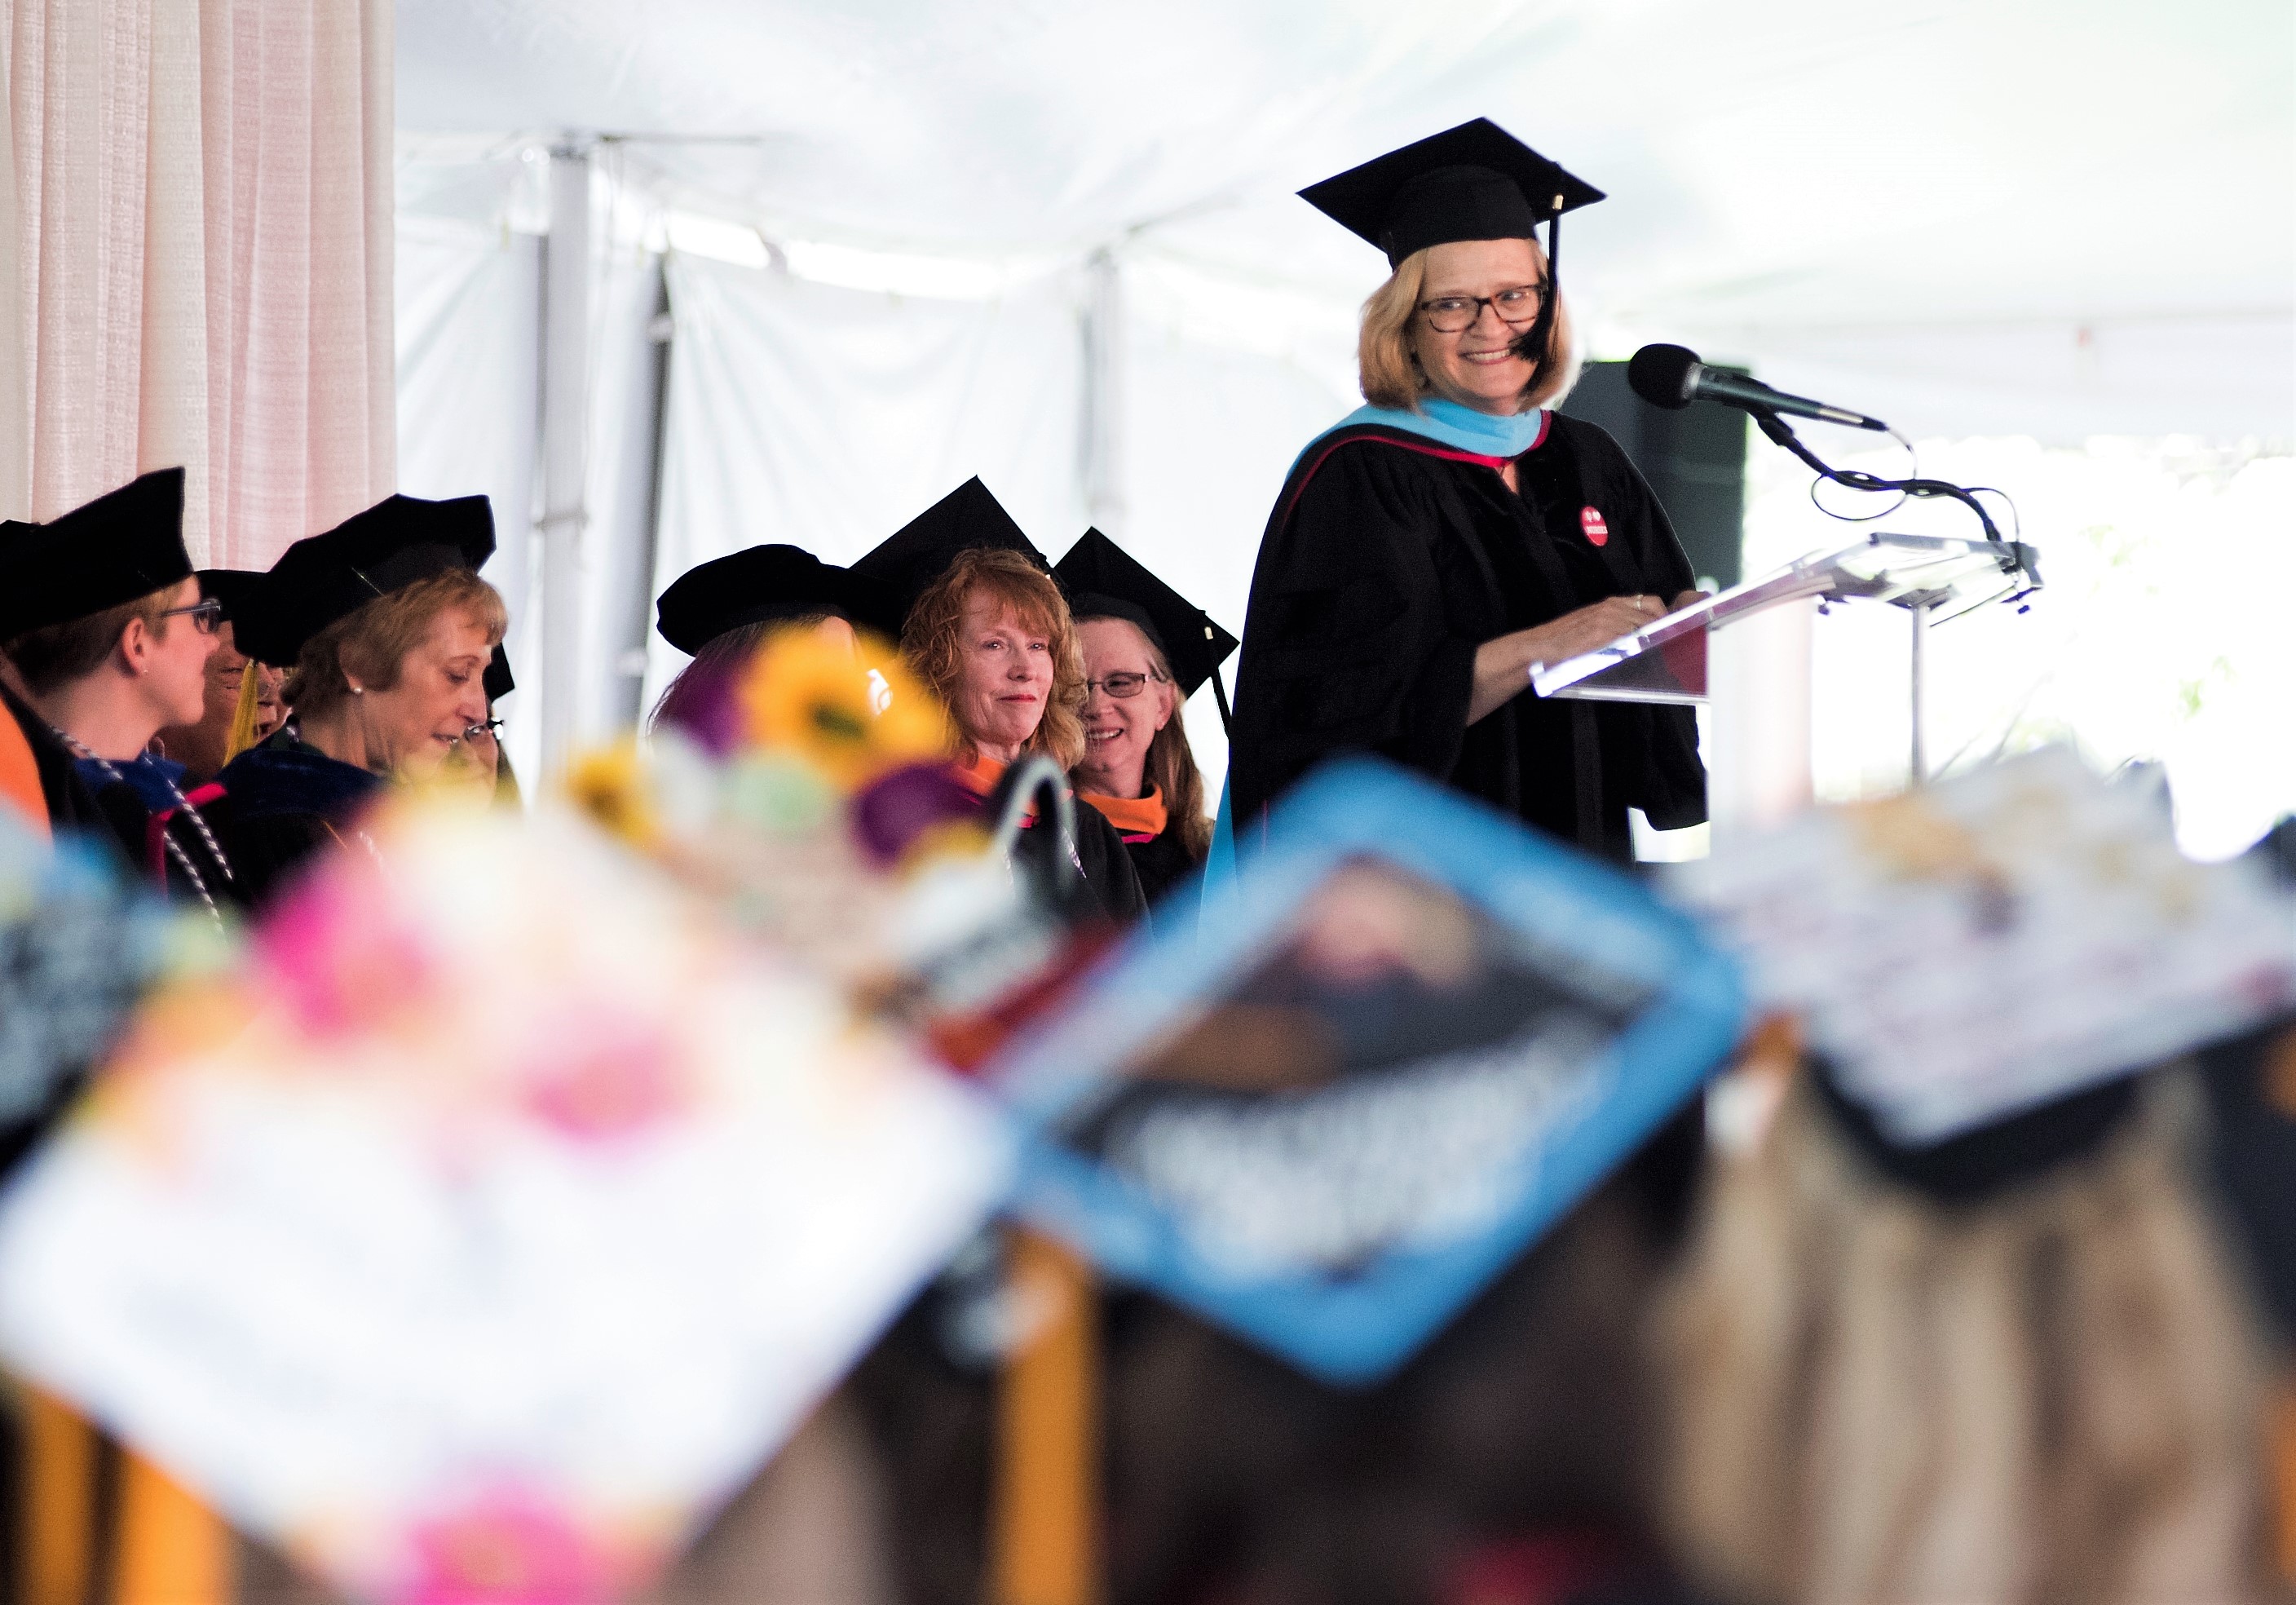 Faculty member speaking at podium during commencement